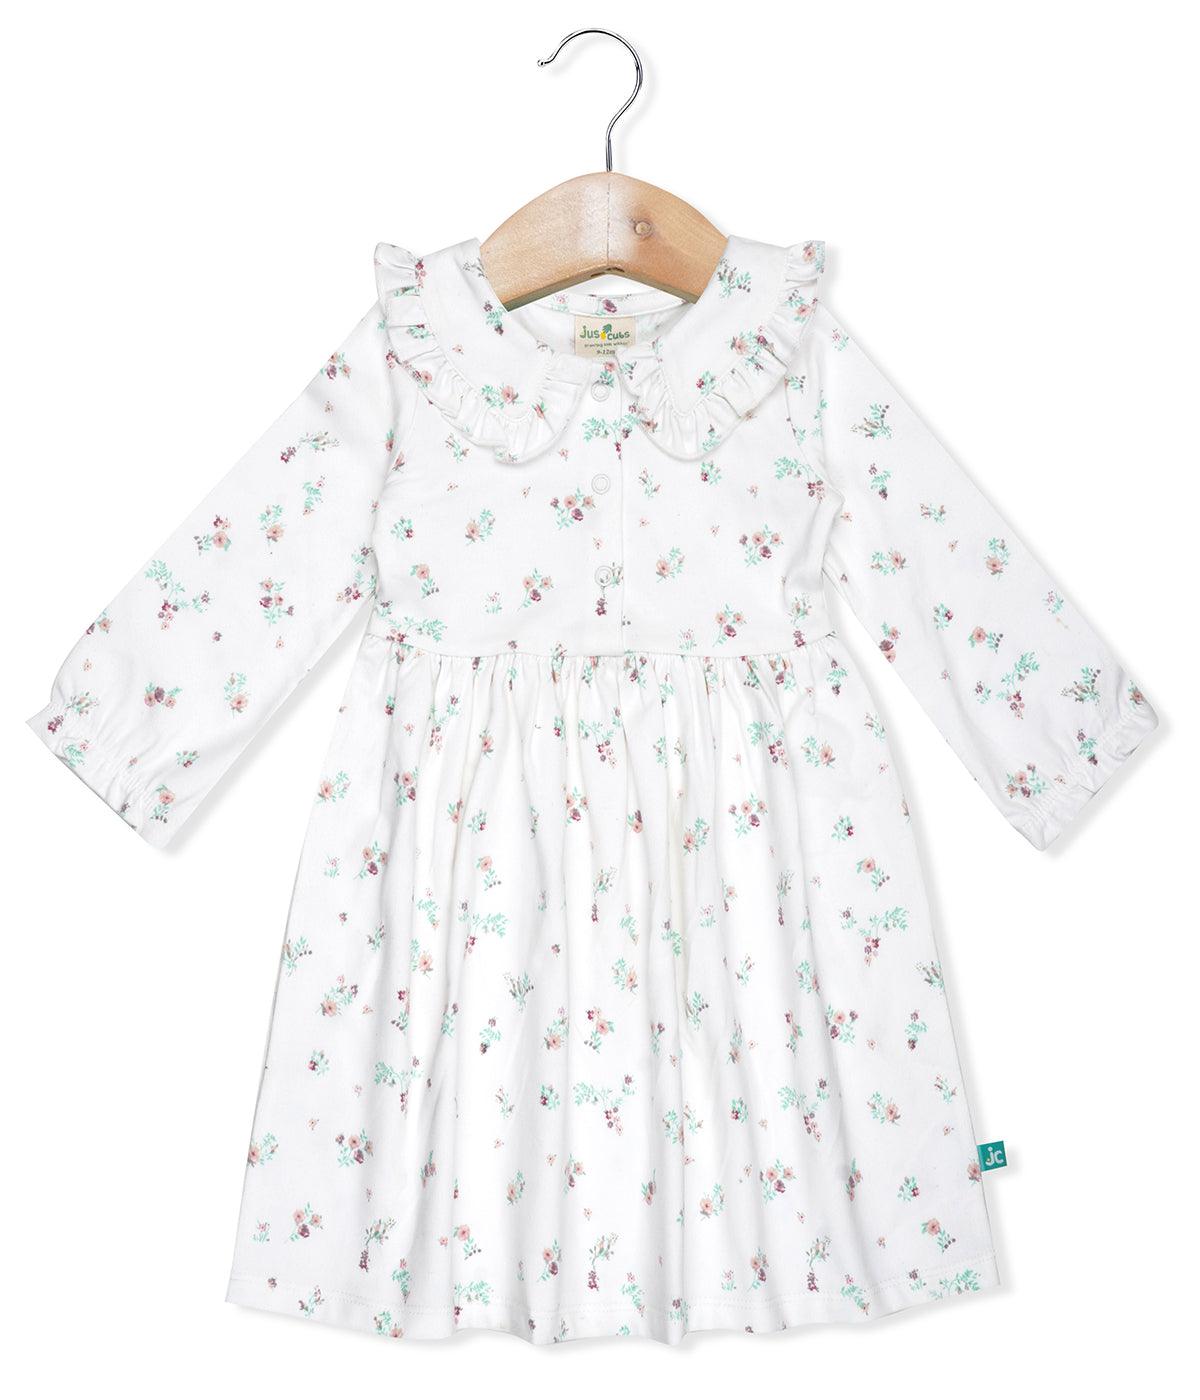 Girls Floral Printed Fit & Flare Dress-White - Juscubs